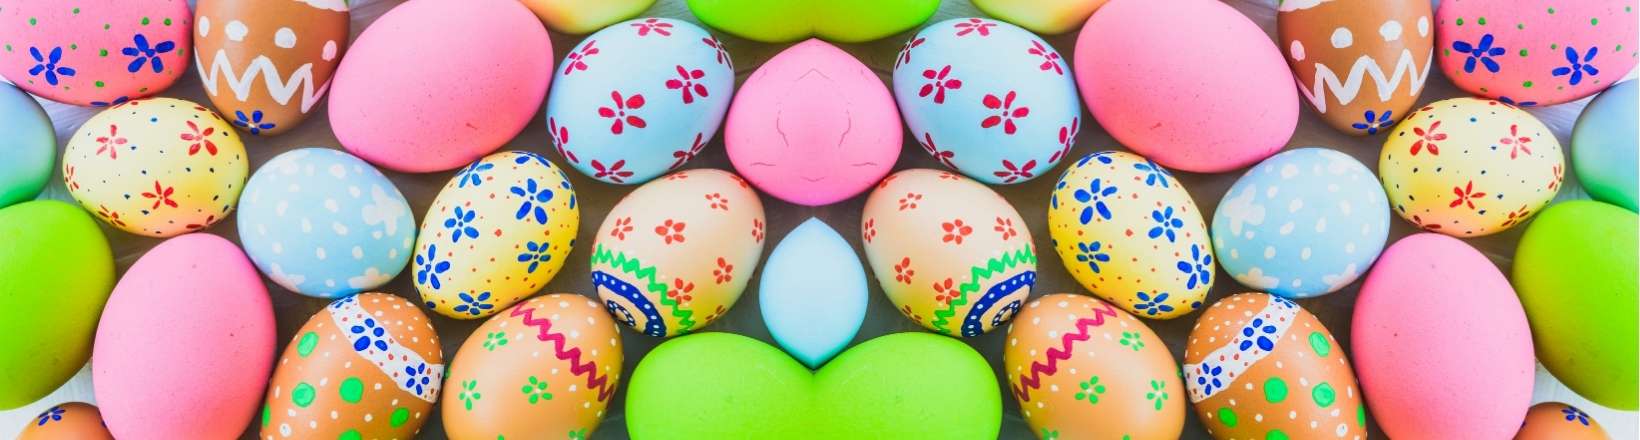 Top 3 marketing tips to boost your Easter sales